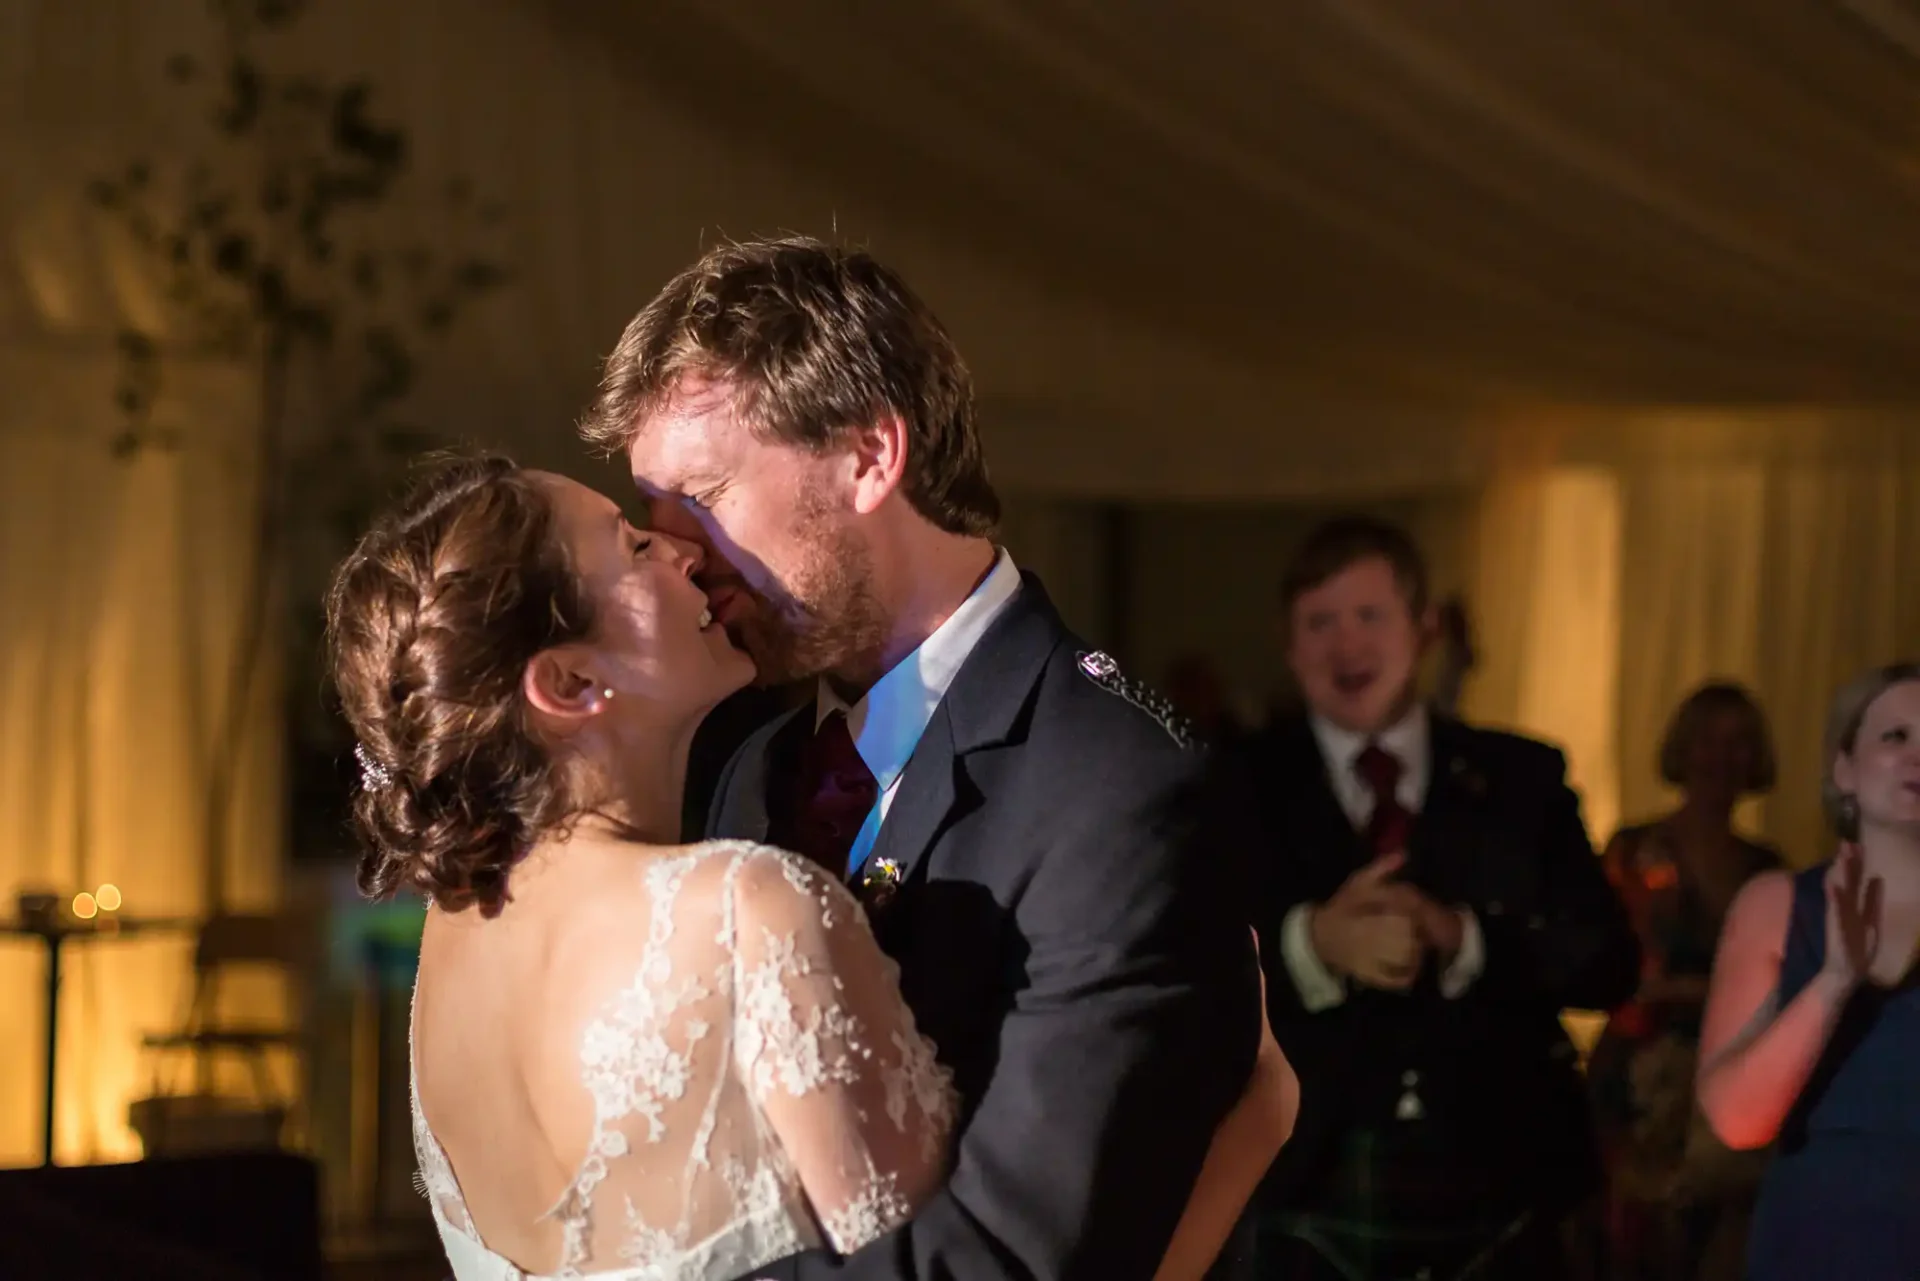 newlyweds' kiss at the end of the first dance in the marquee